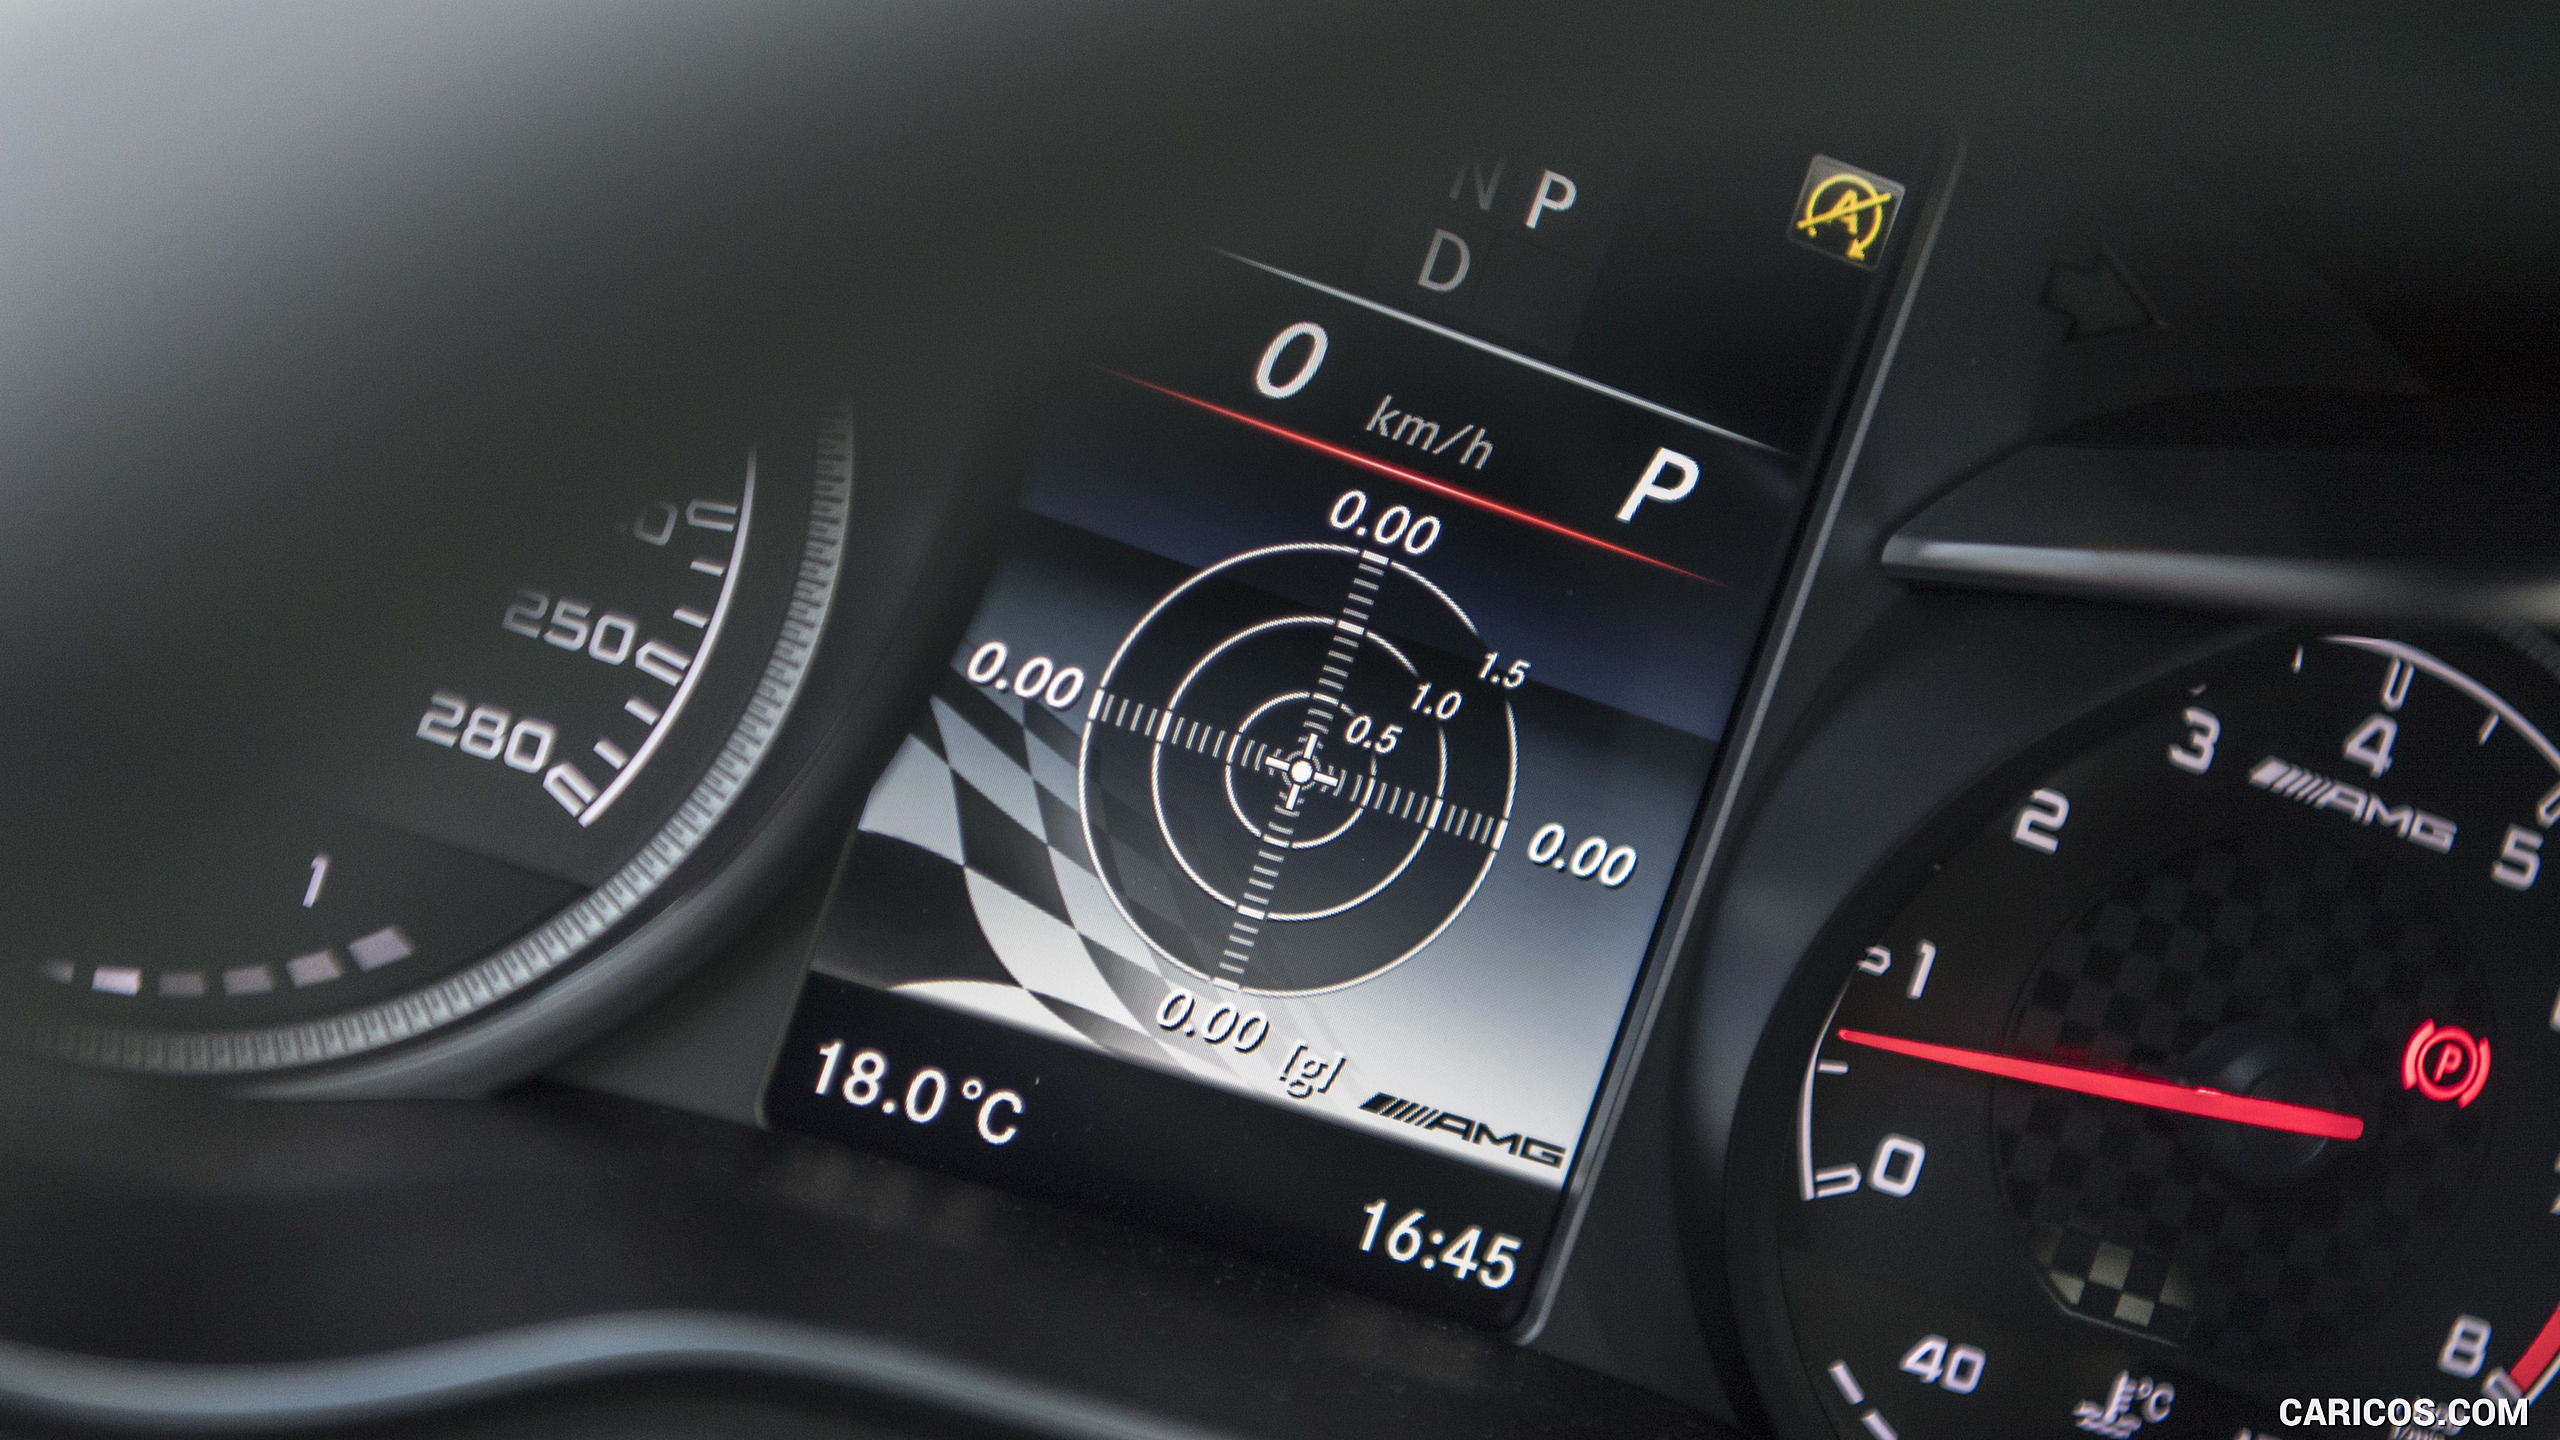 2017 Mercedes-AMG GLC 43 Coupé - Instrument Cluster, #37 of 83